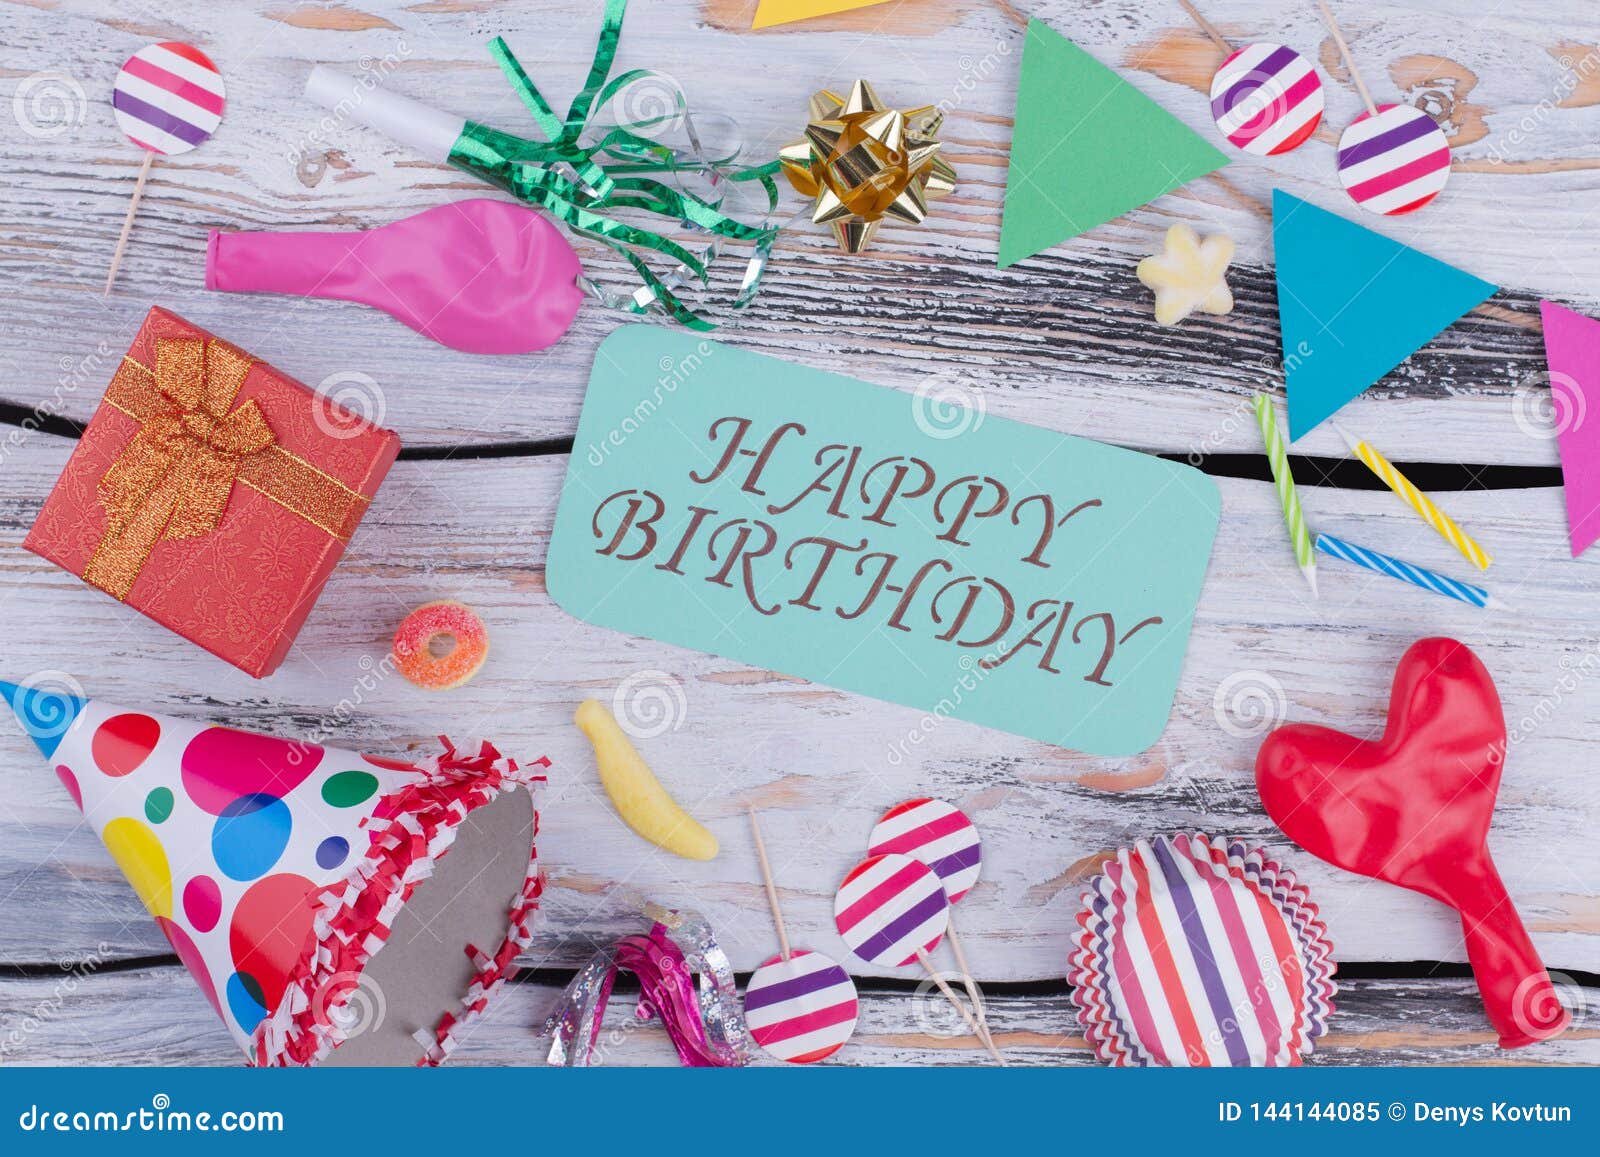 Happy Birthday Background with Colorful Party Supplies. Stock Image ...